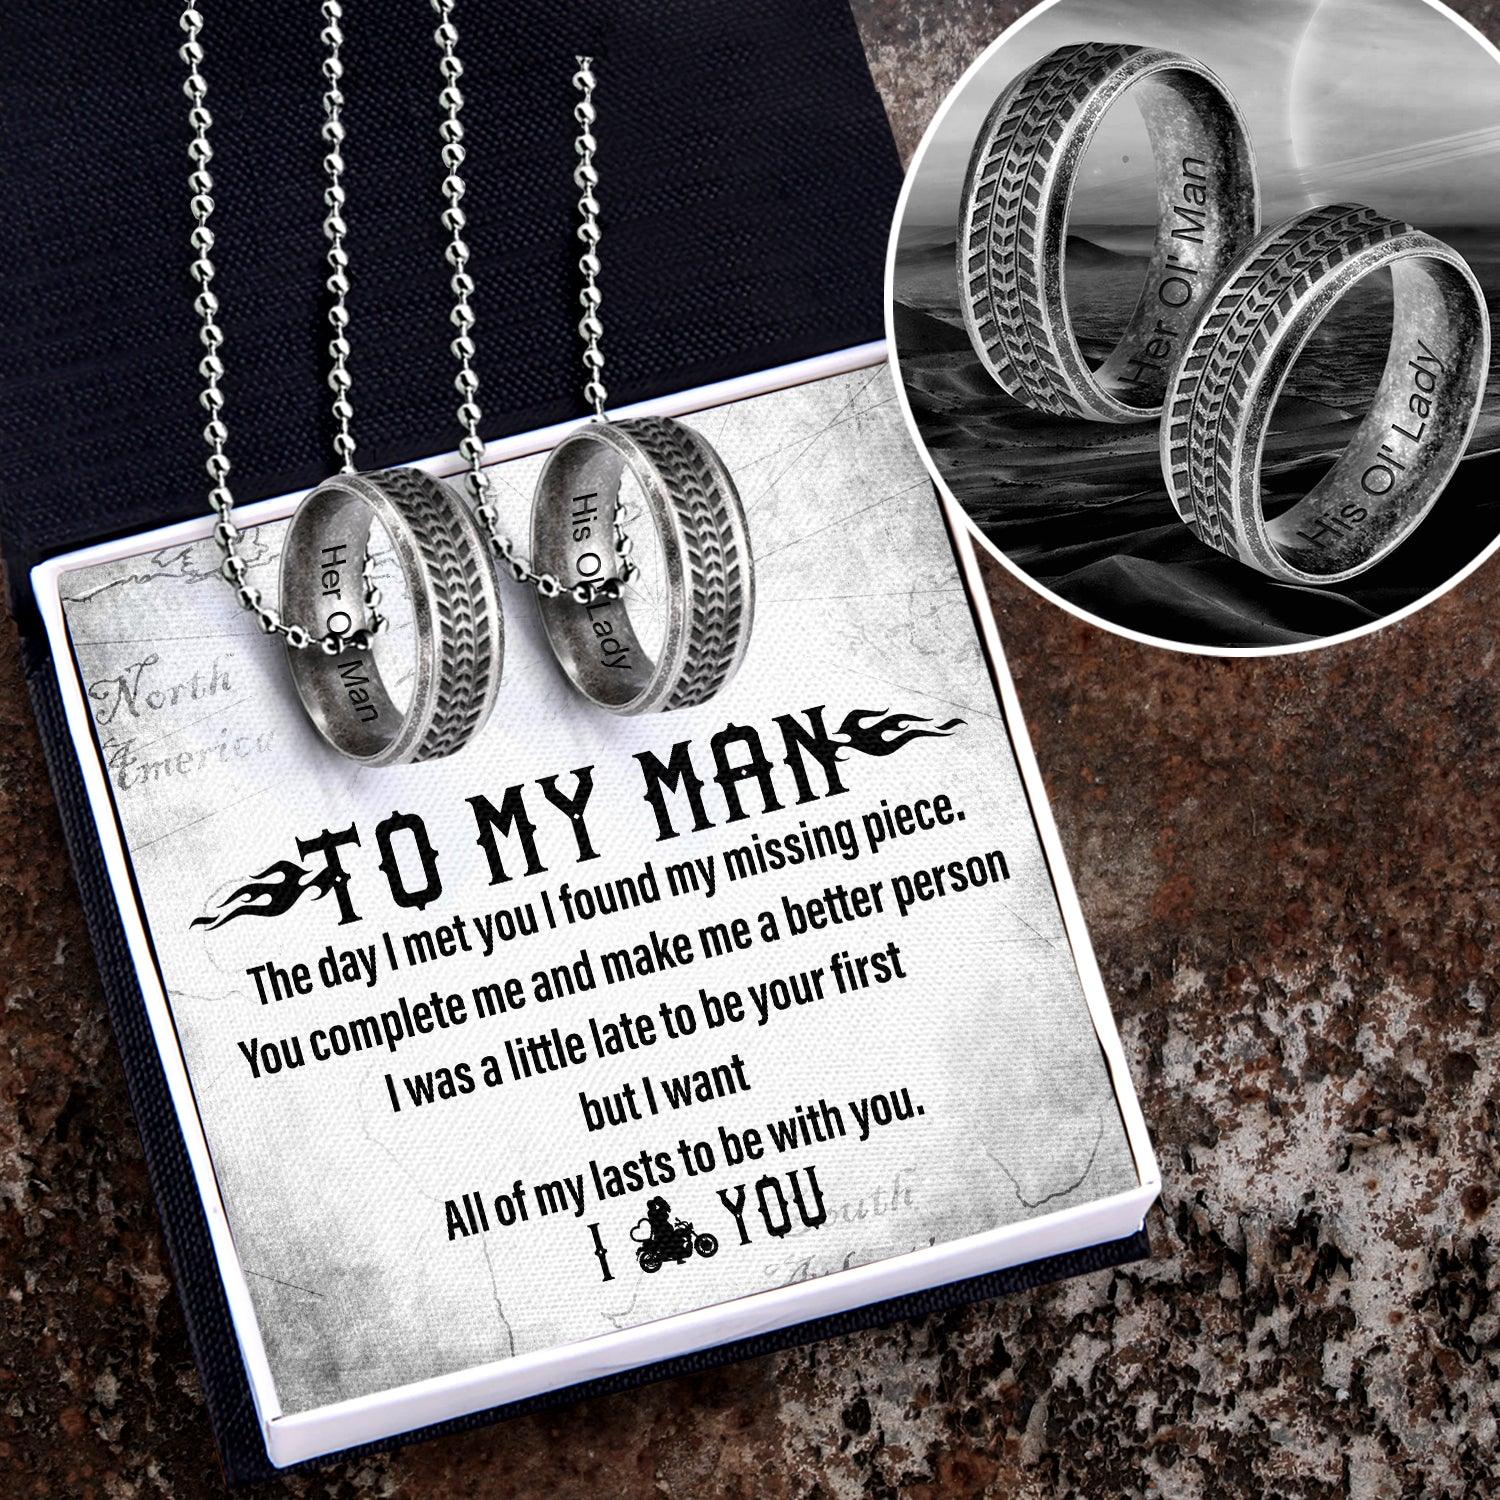 Couple Wheel Ring Necklaces - Biker - To My Man - Make Me A Better Person - Augndx26009 - Gifts Holder